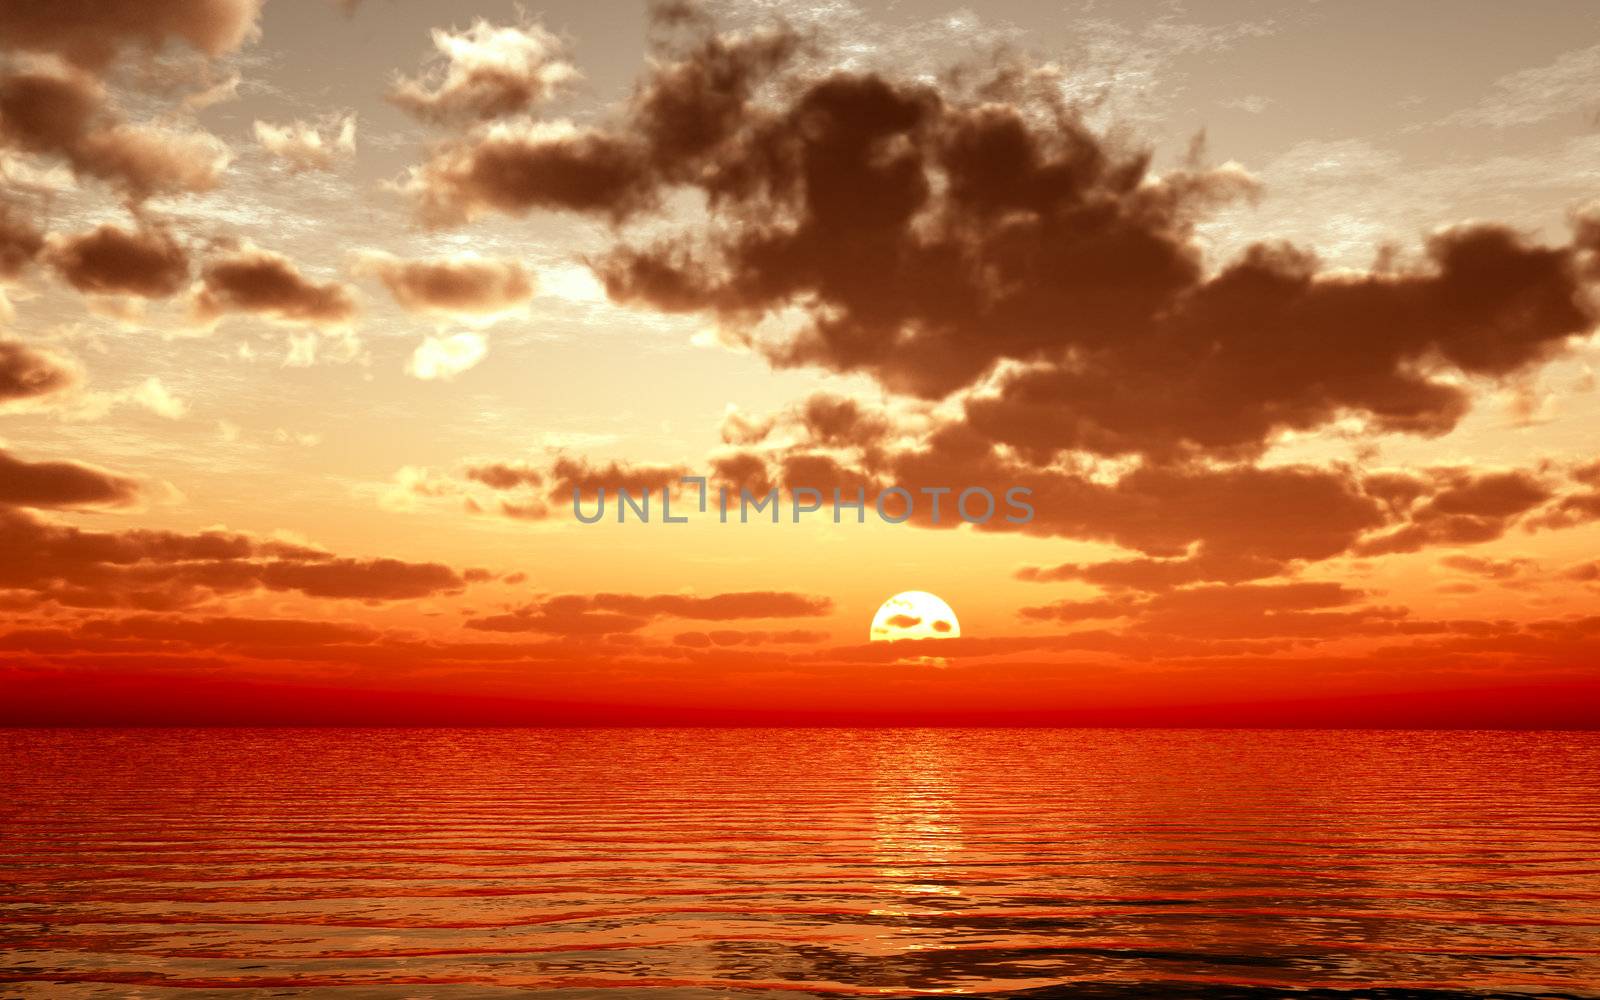 An illustration of a bright ocean sunset